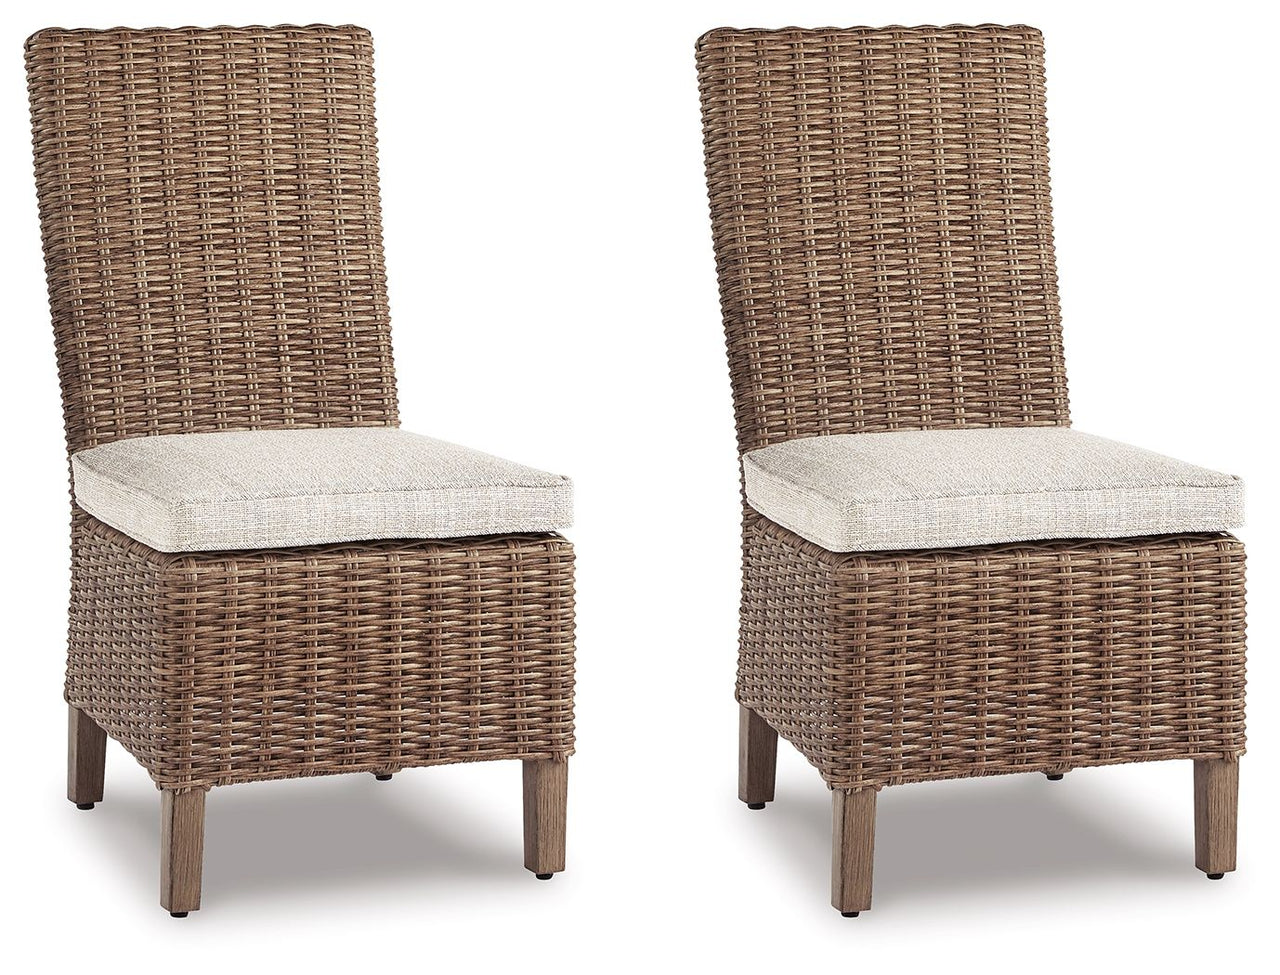 Beachcroft - Outdoor Dining Side Chair - Tony's Home Furnishings